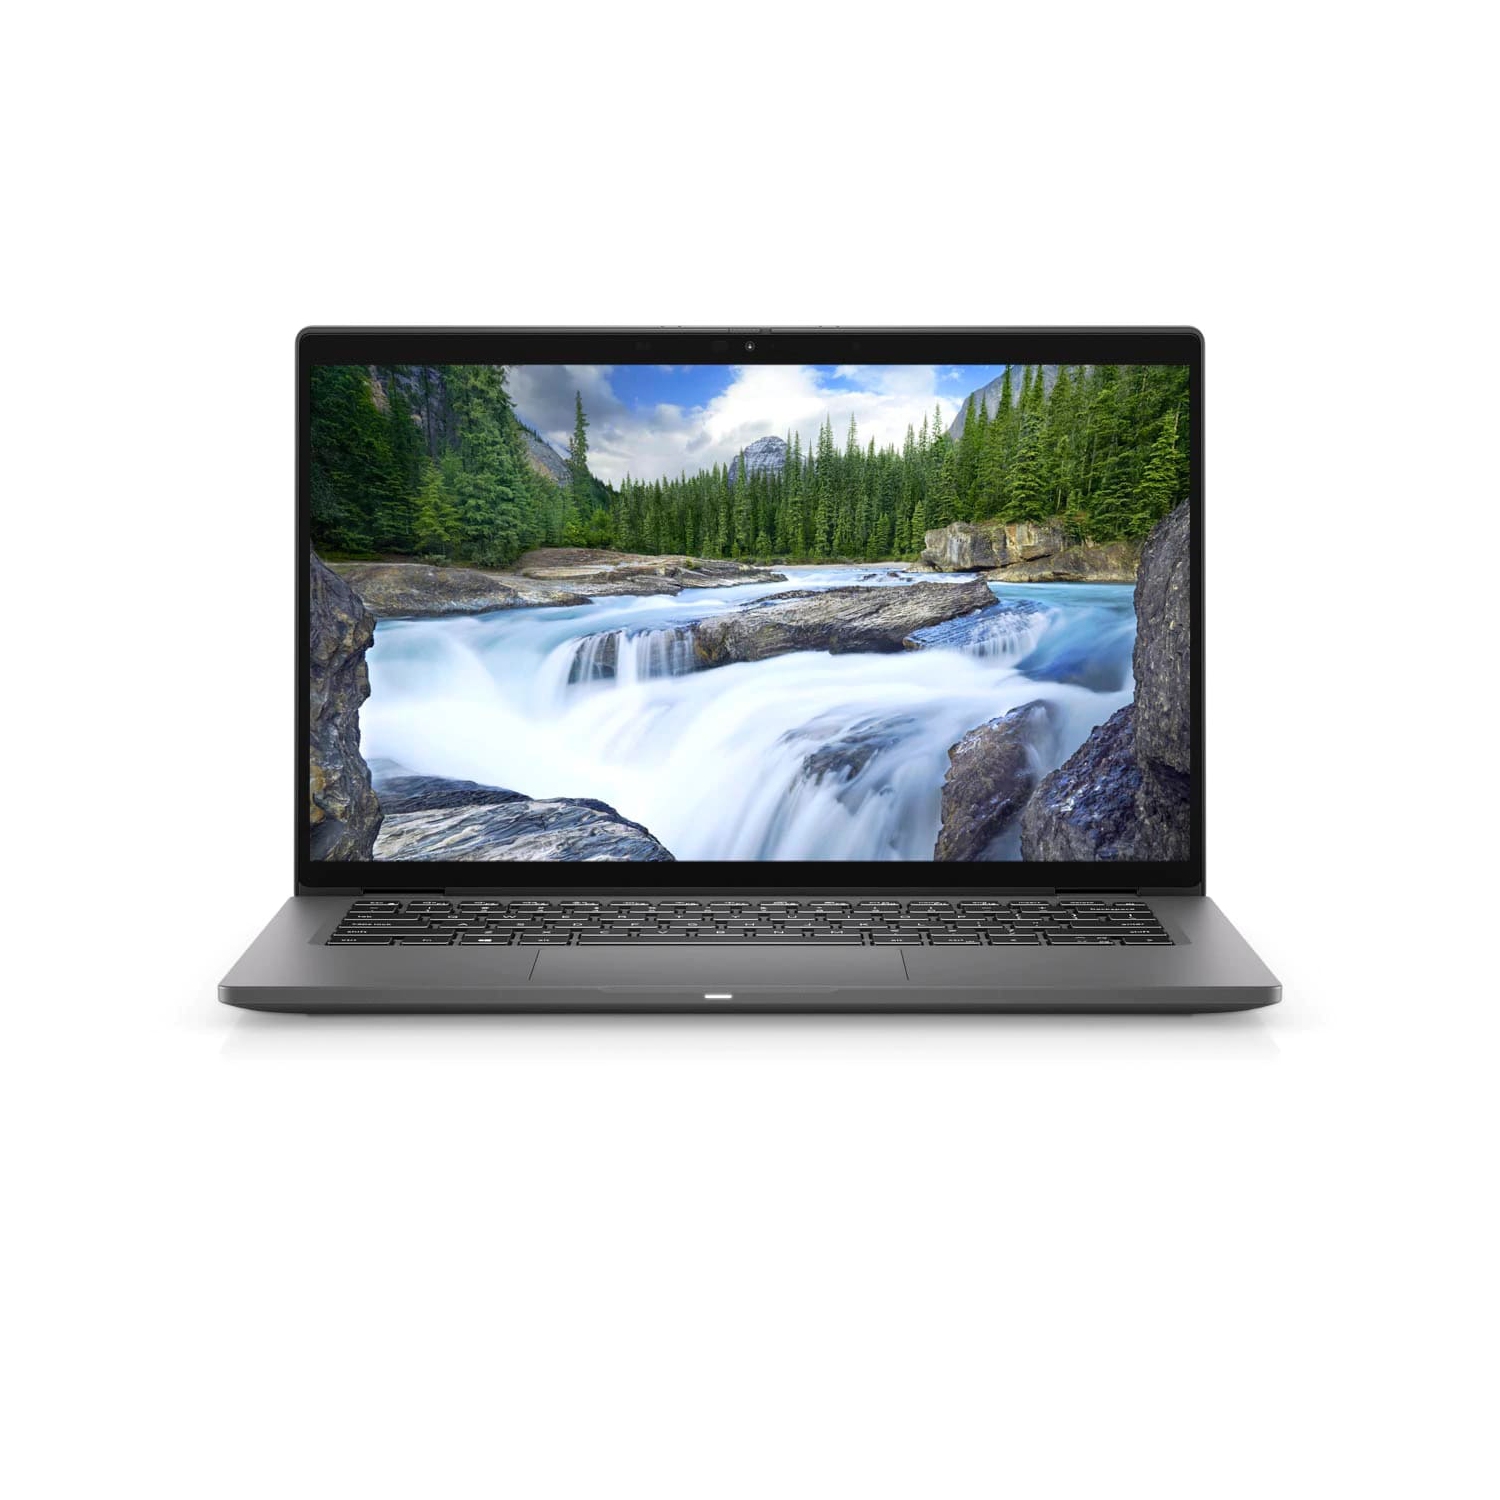 Refurbished (Excellent) - Dell Latitude 7000 7410 Laptop (2020) | 14" HD | Core i5 - 512GB SSD - 16GB RAM | 4 Cores @ 4.4 GHz - 10th Gen CPU Certified Refurbished